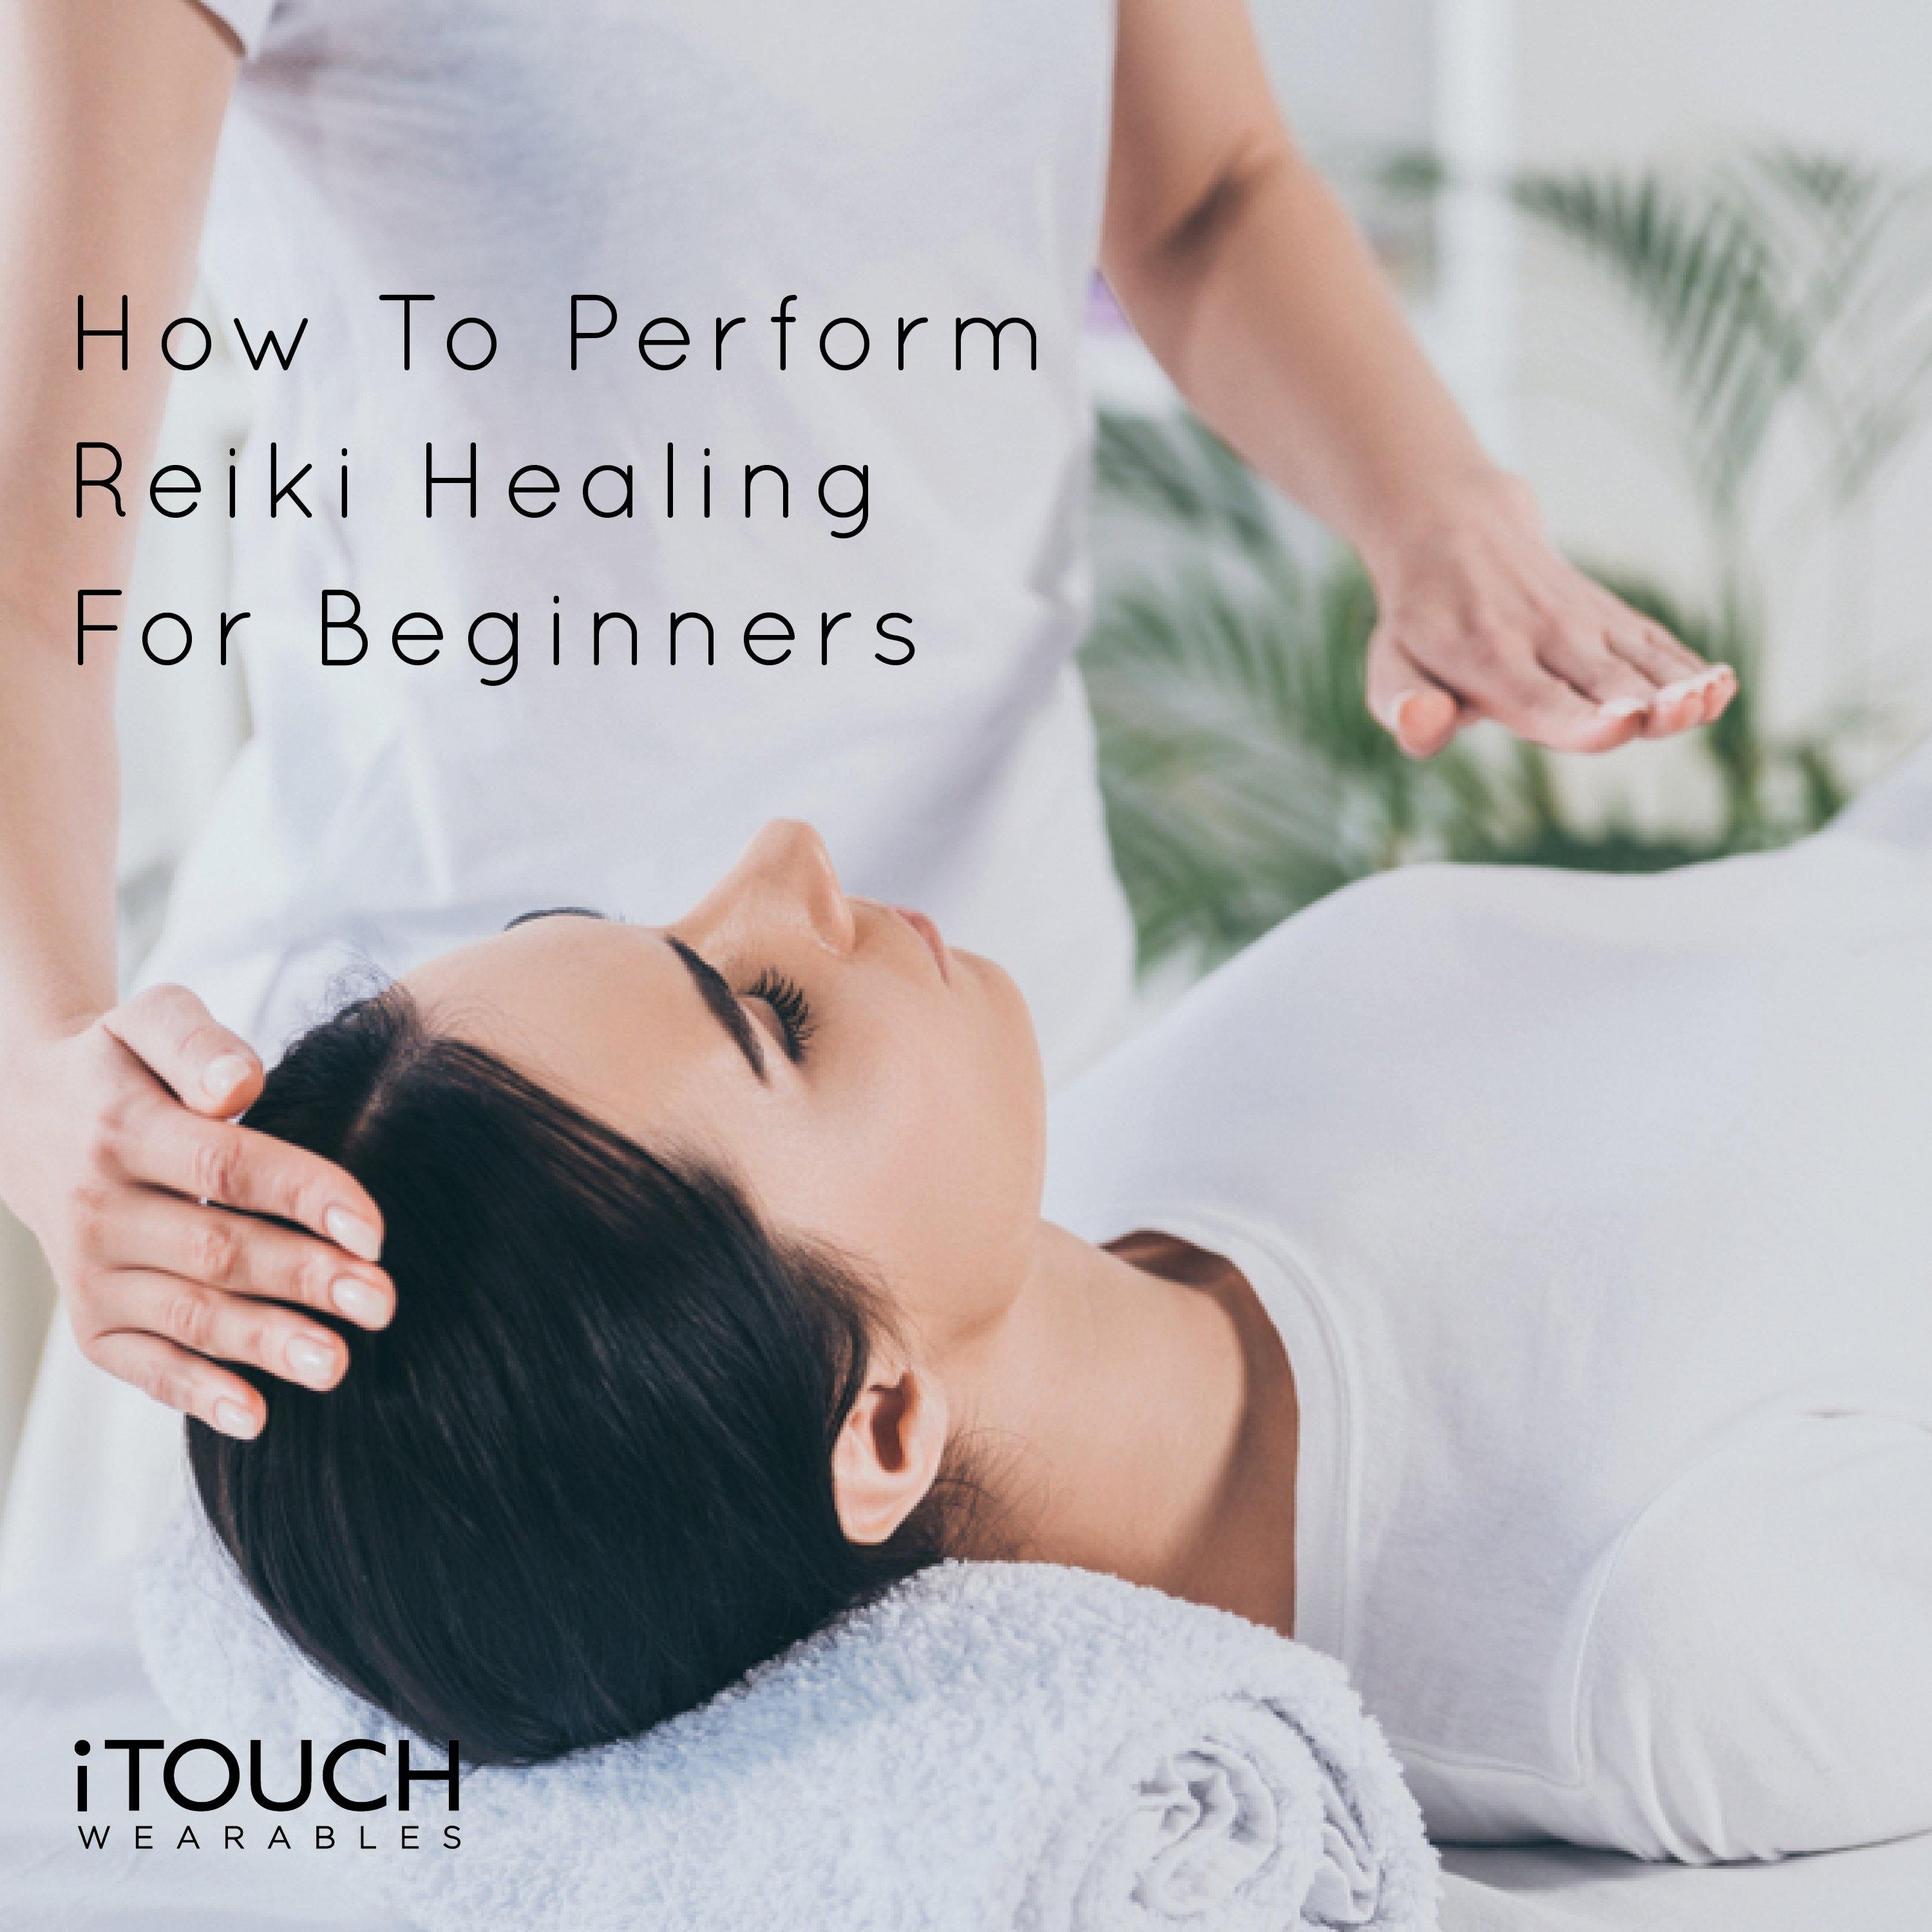 How To Perform Reiki Healing For Beginners - iTOUCH Wearables